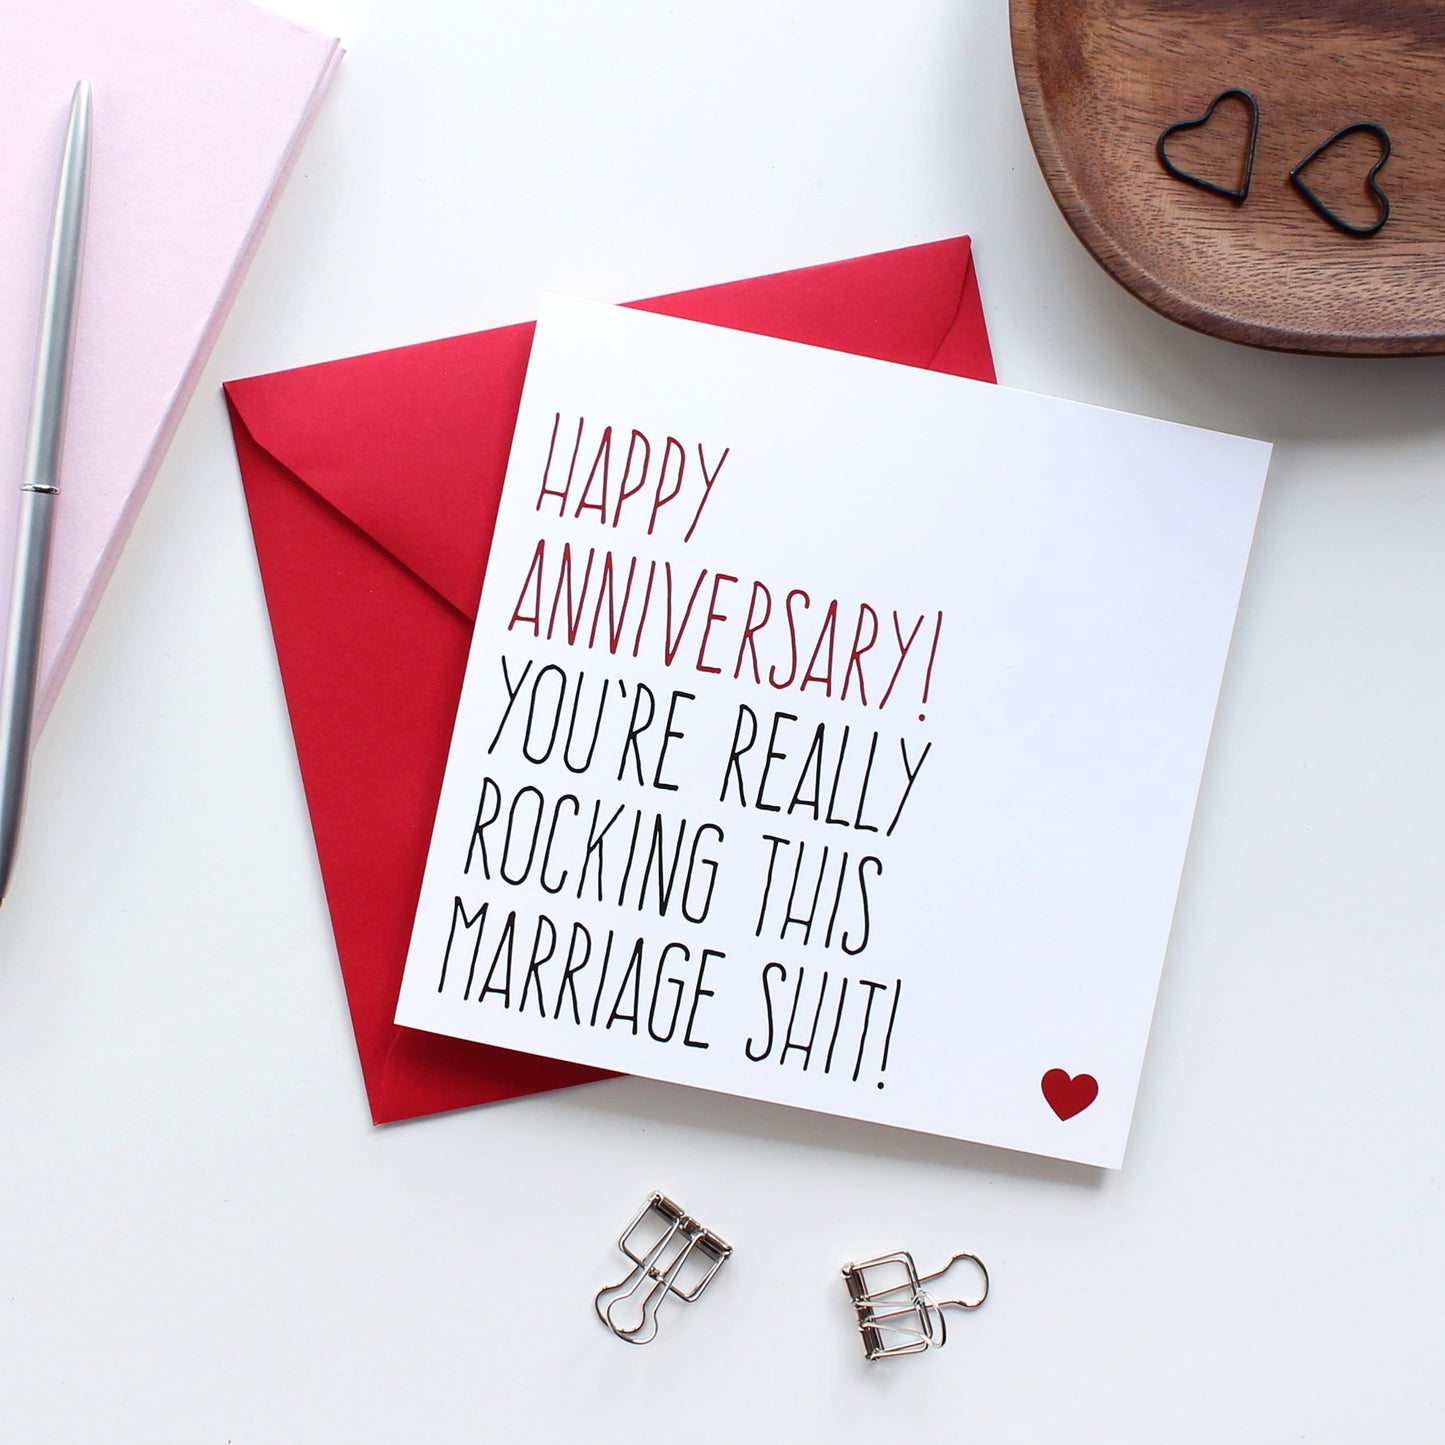 You're rocking this marriage shit anniversary card